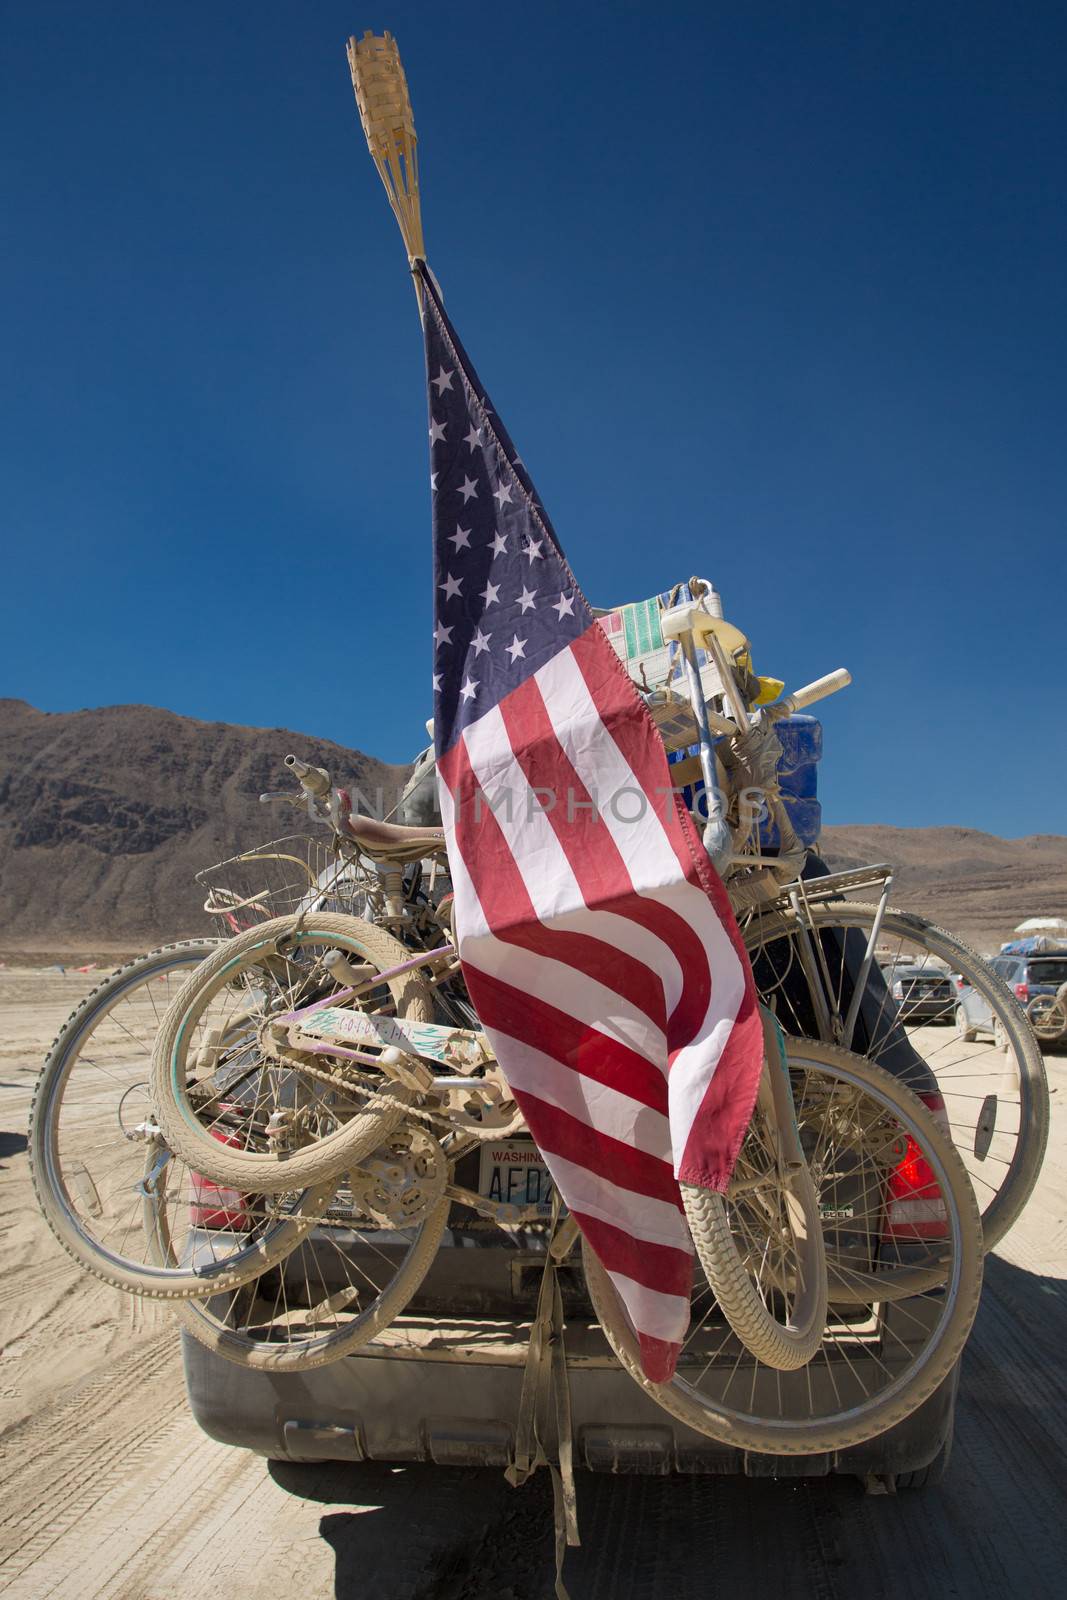 Mountain bikes on a car rack taken at the exit of the Burning Man festival in 2012 with US flags